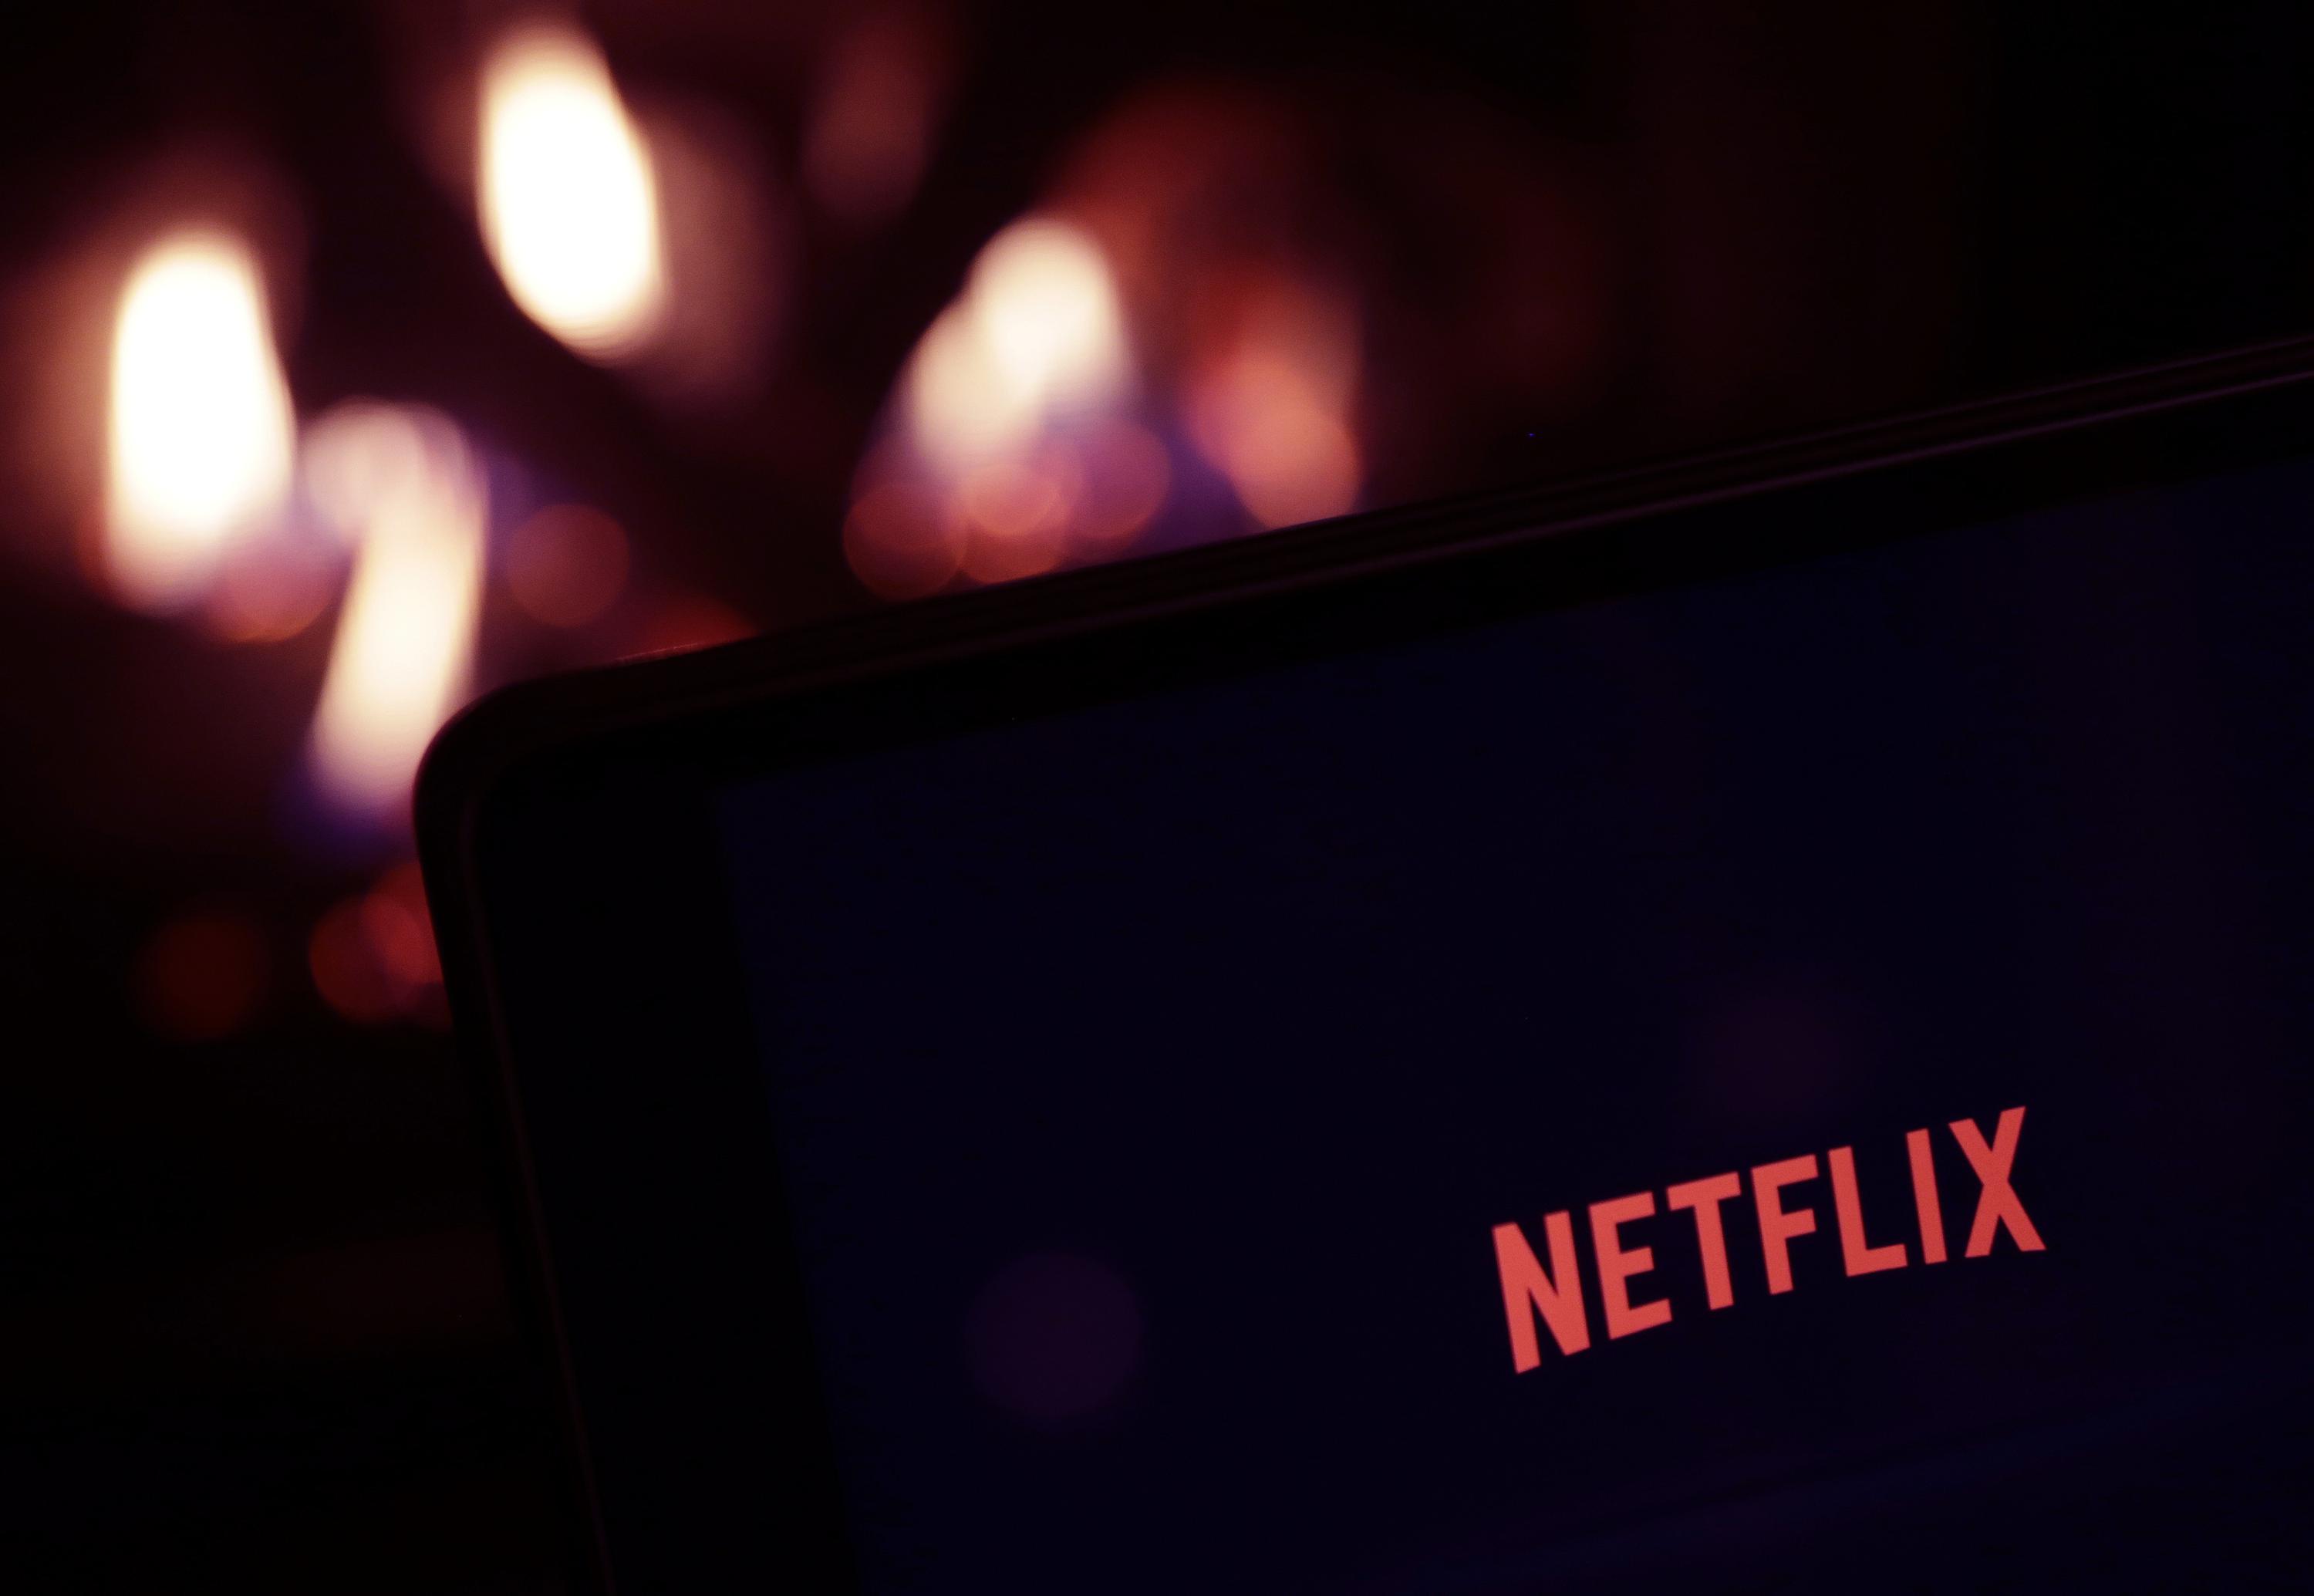 Gulf Arab nations ask Netflix to remove ‘offensive’ videos